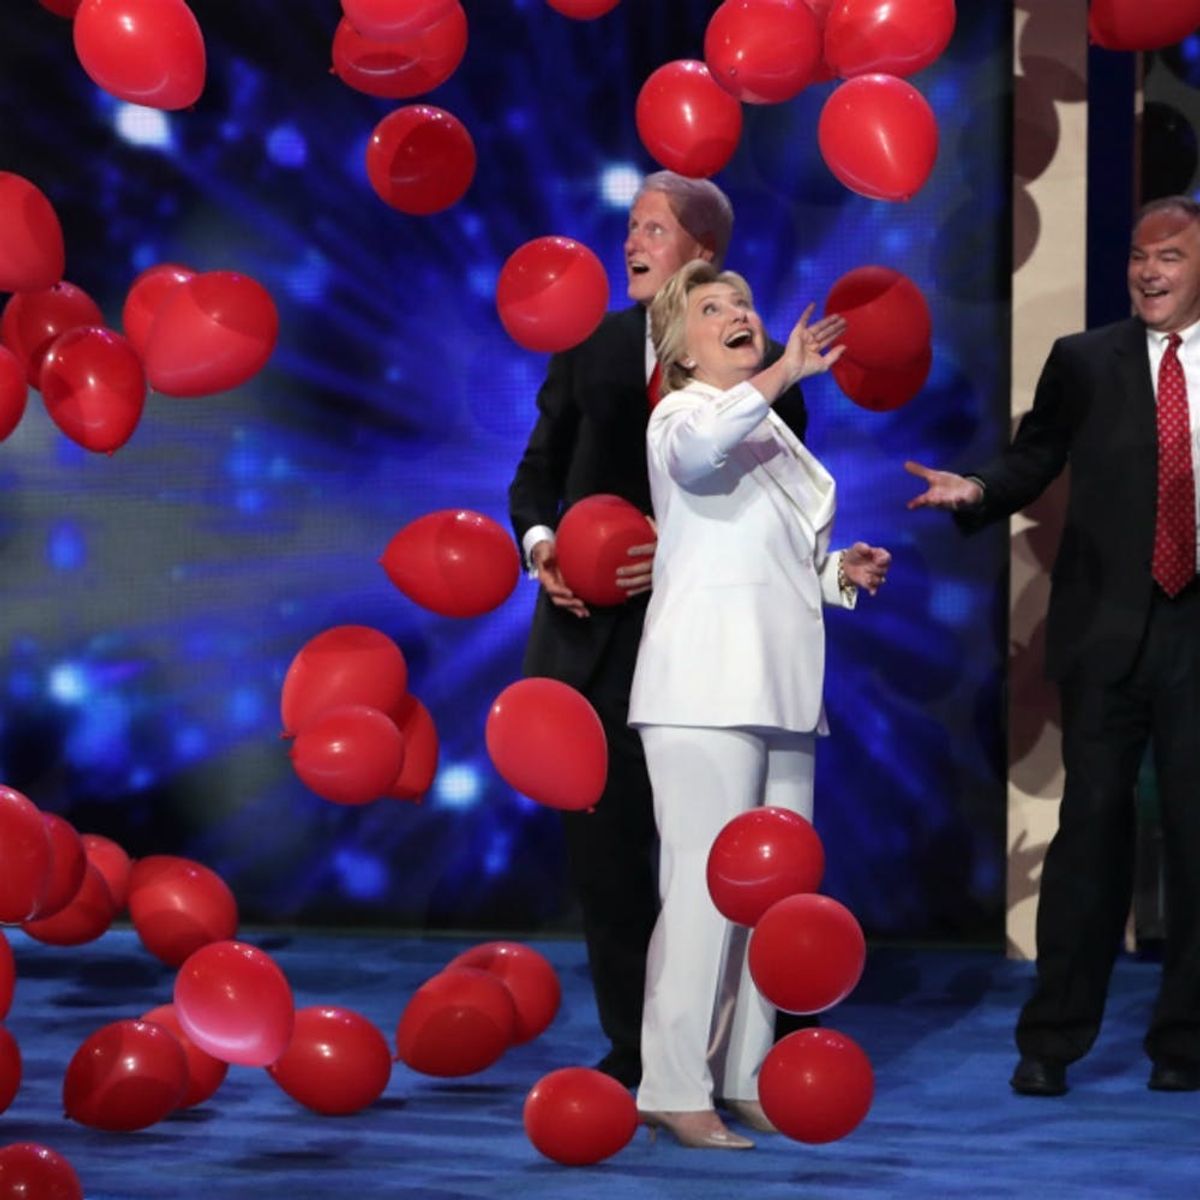 Everything You Need to Fully Appreciate Bill Clinton and His Love of Balloons